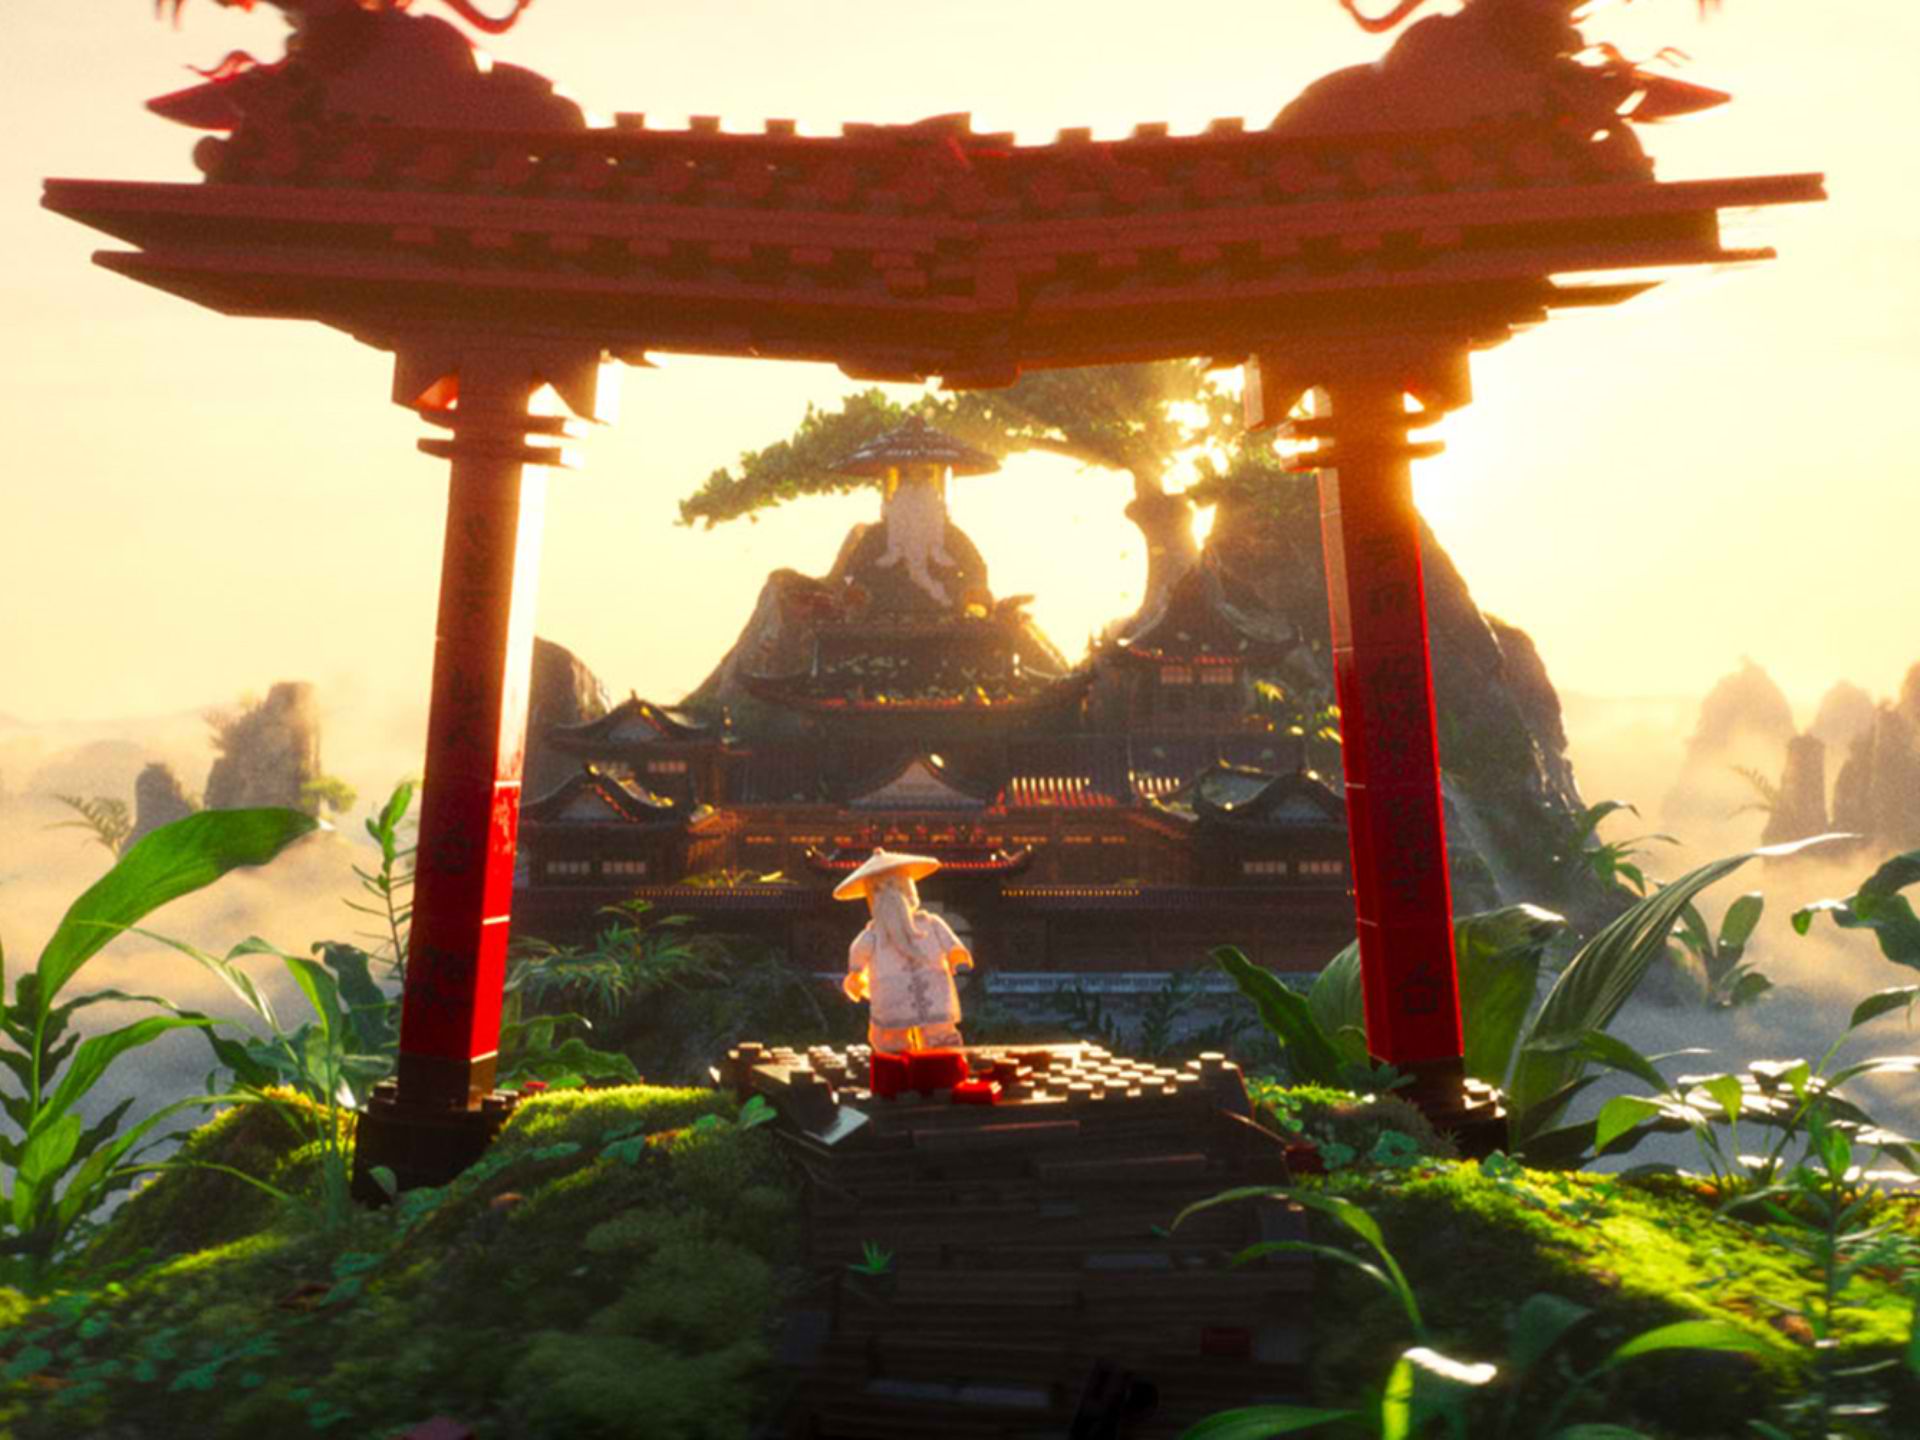 Animated short “THE MASTER” to play in front of “STORKS”